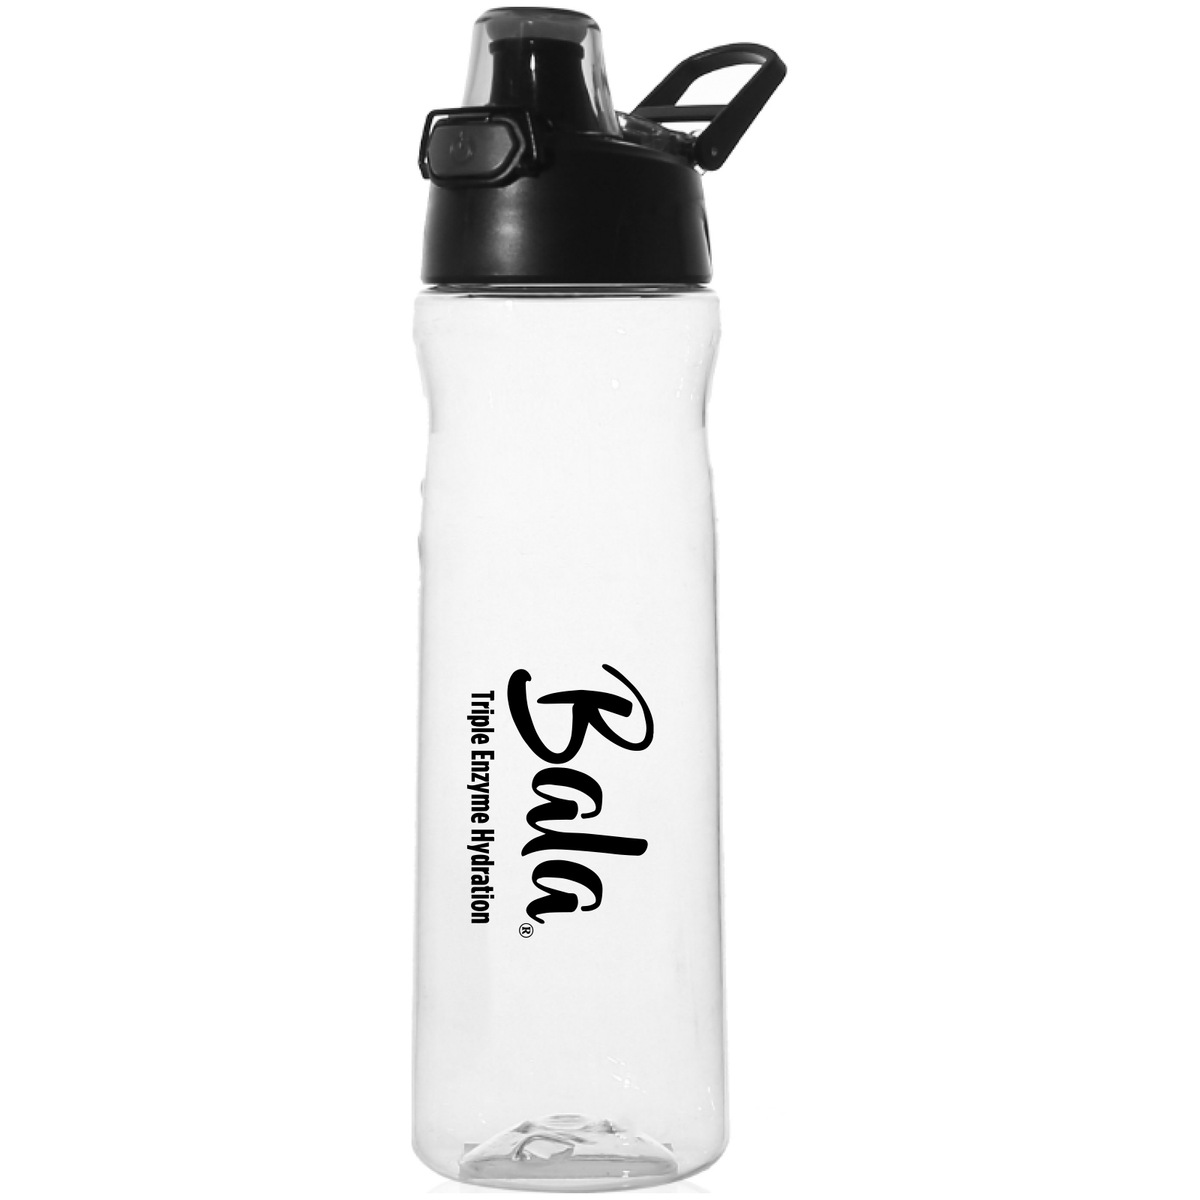 A clear plastic 34oz bottle labeled "The Bala Bottle" from Bala Enzyme with a black flip-top lid and carrying handle, promoting Total Body Wellness Drink, and is BPA free.